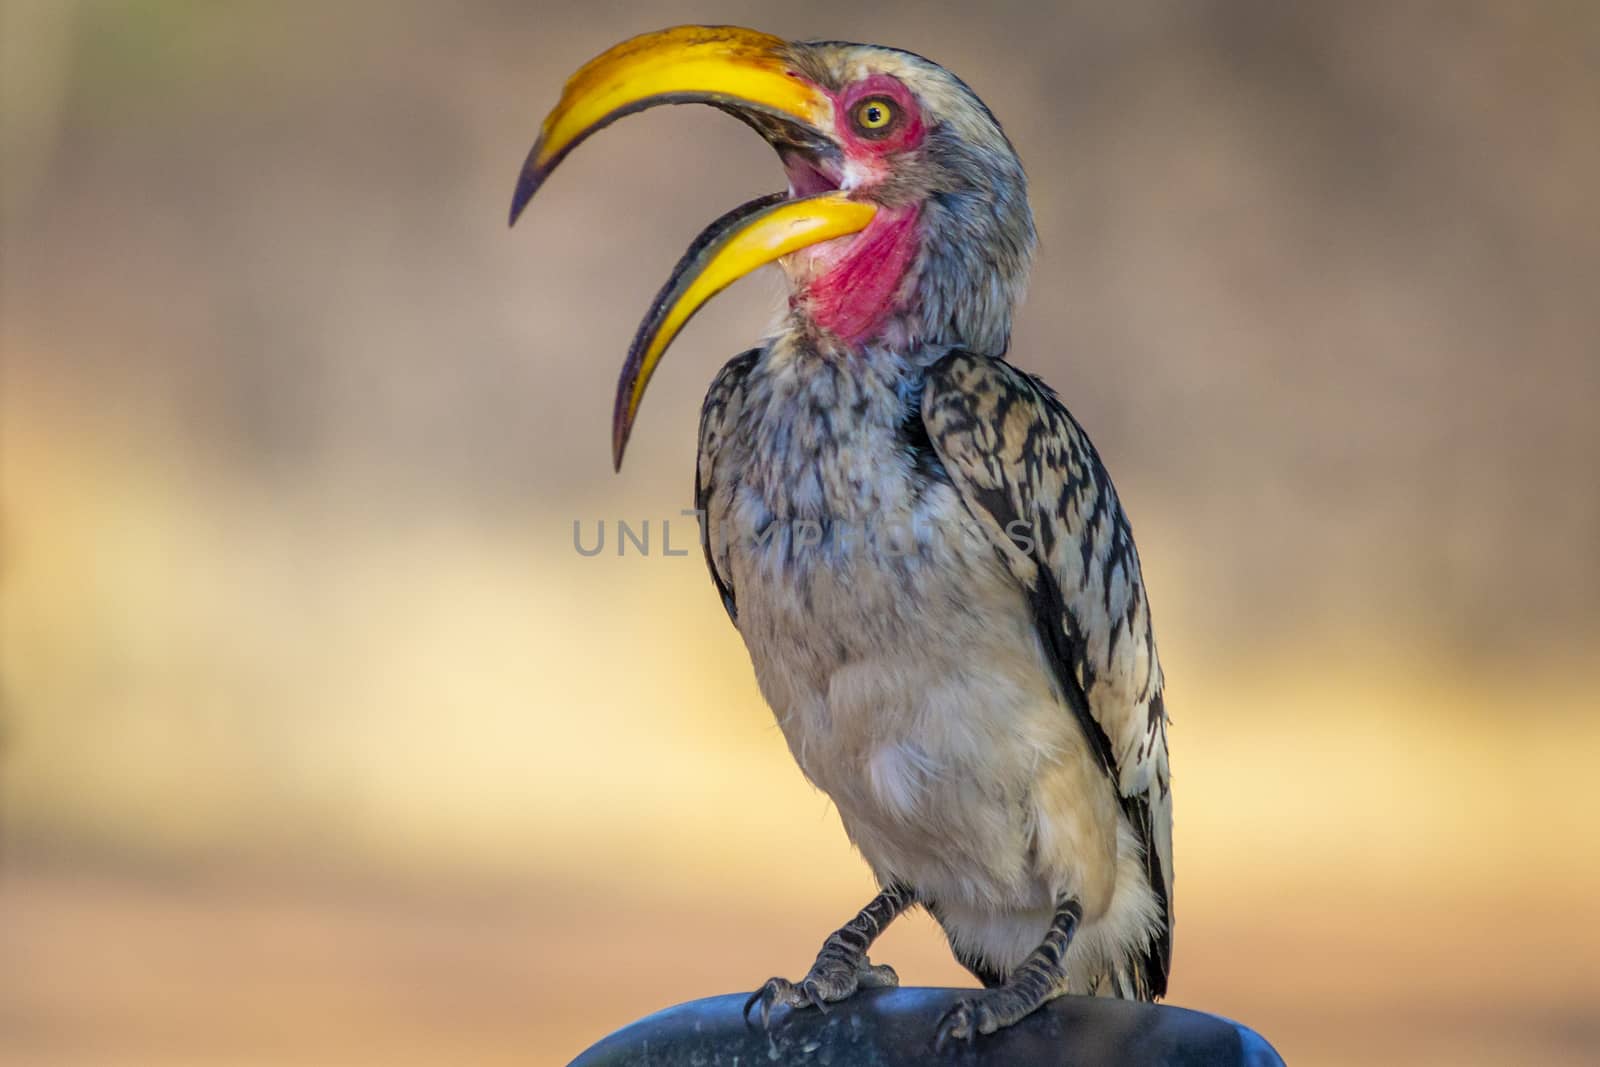 Southeren yellow-billed hornbill or latin name Tockus leucomelas. by kb79